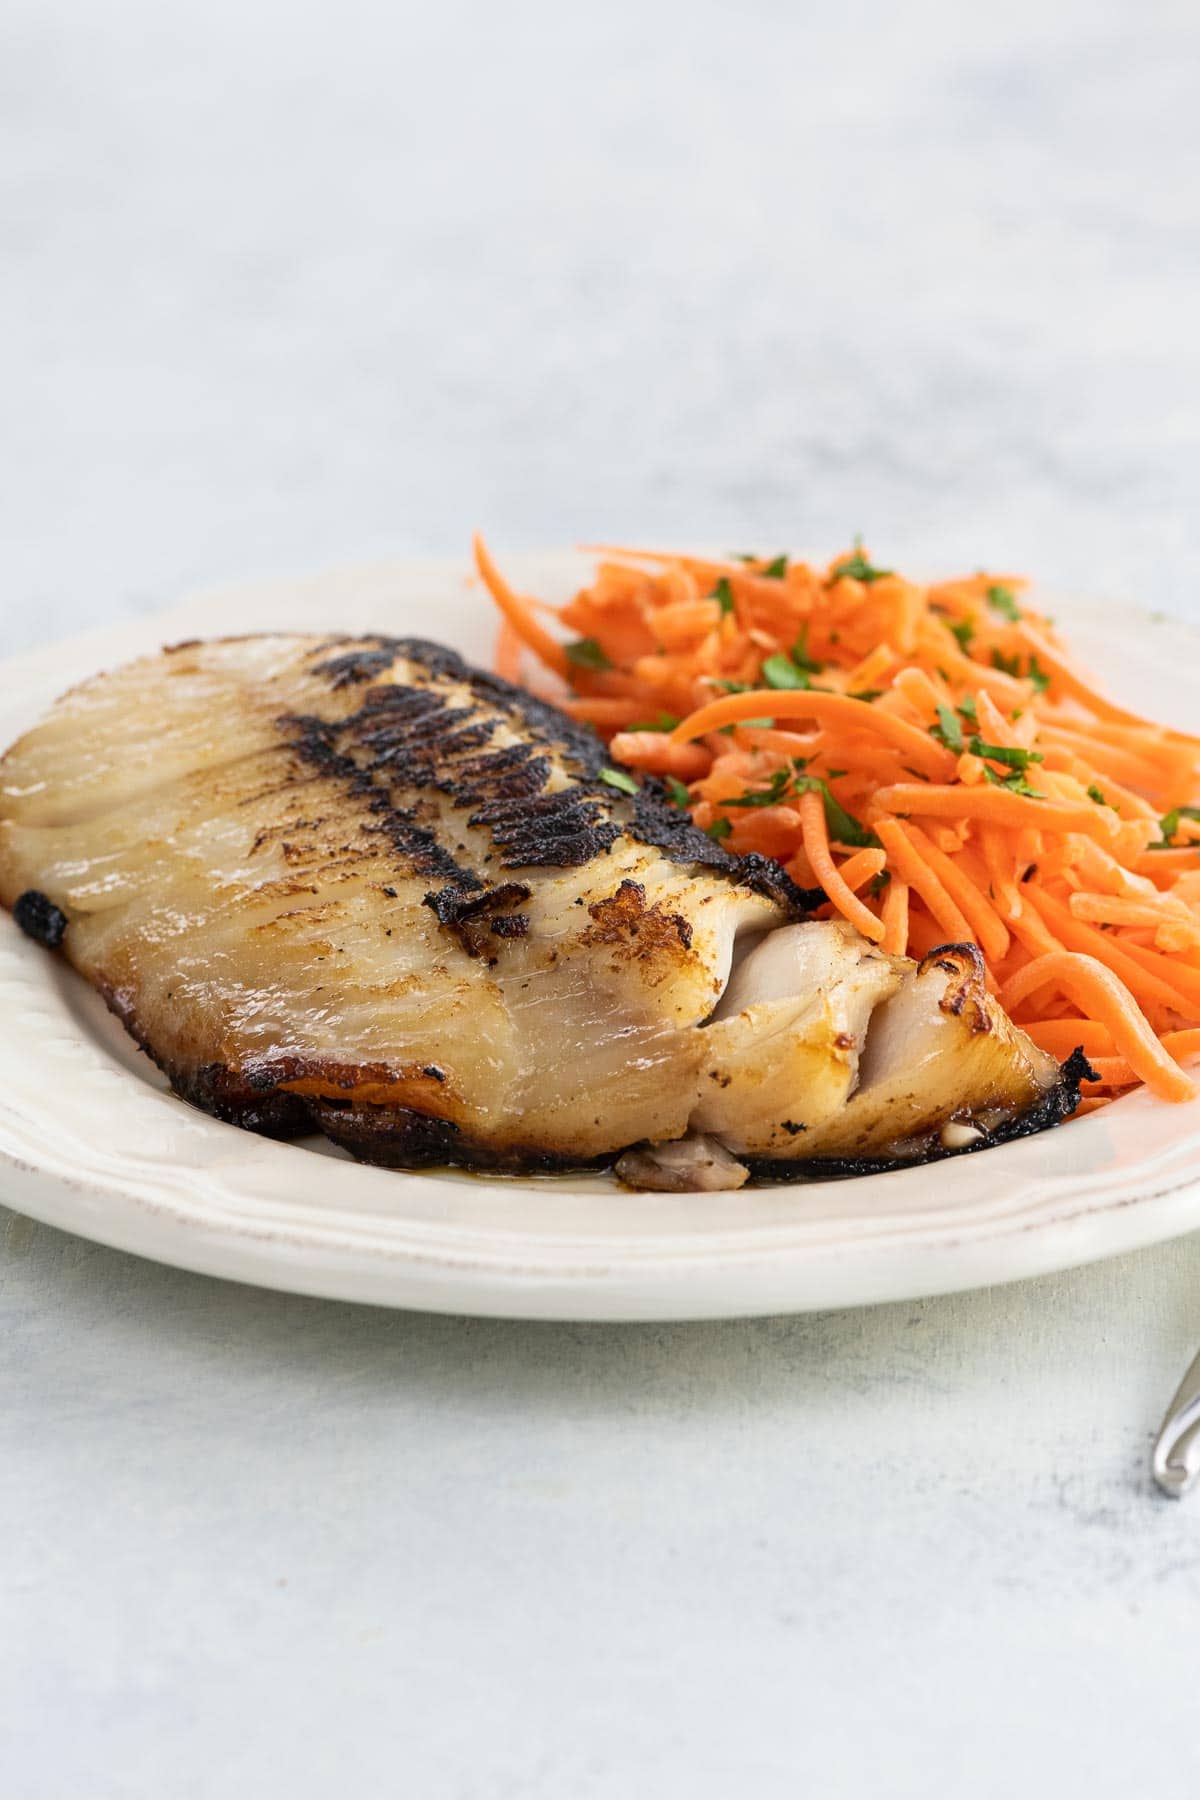 Nobu miso black cod on a plate with shredded carrots and parsley